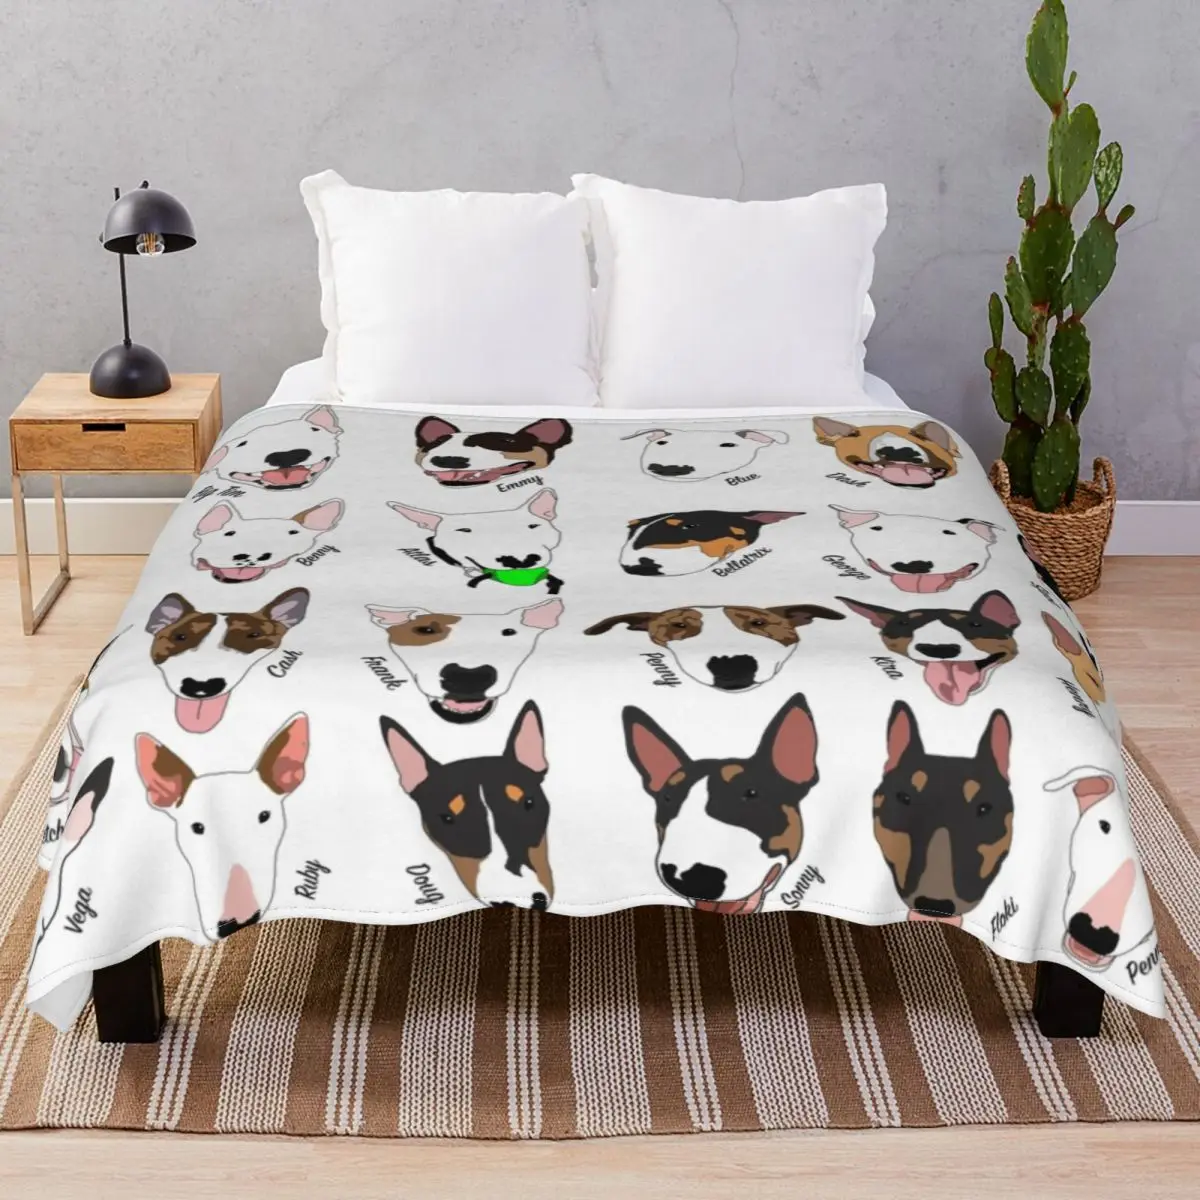 Glasgow Bull Terrier Club Blankets Fleece Print Super Soft Throw Blanket for Bed Home Couch Camp Office